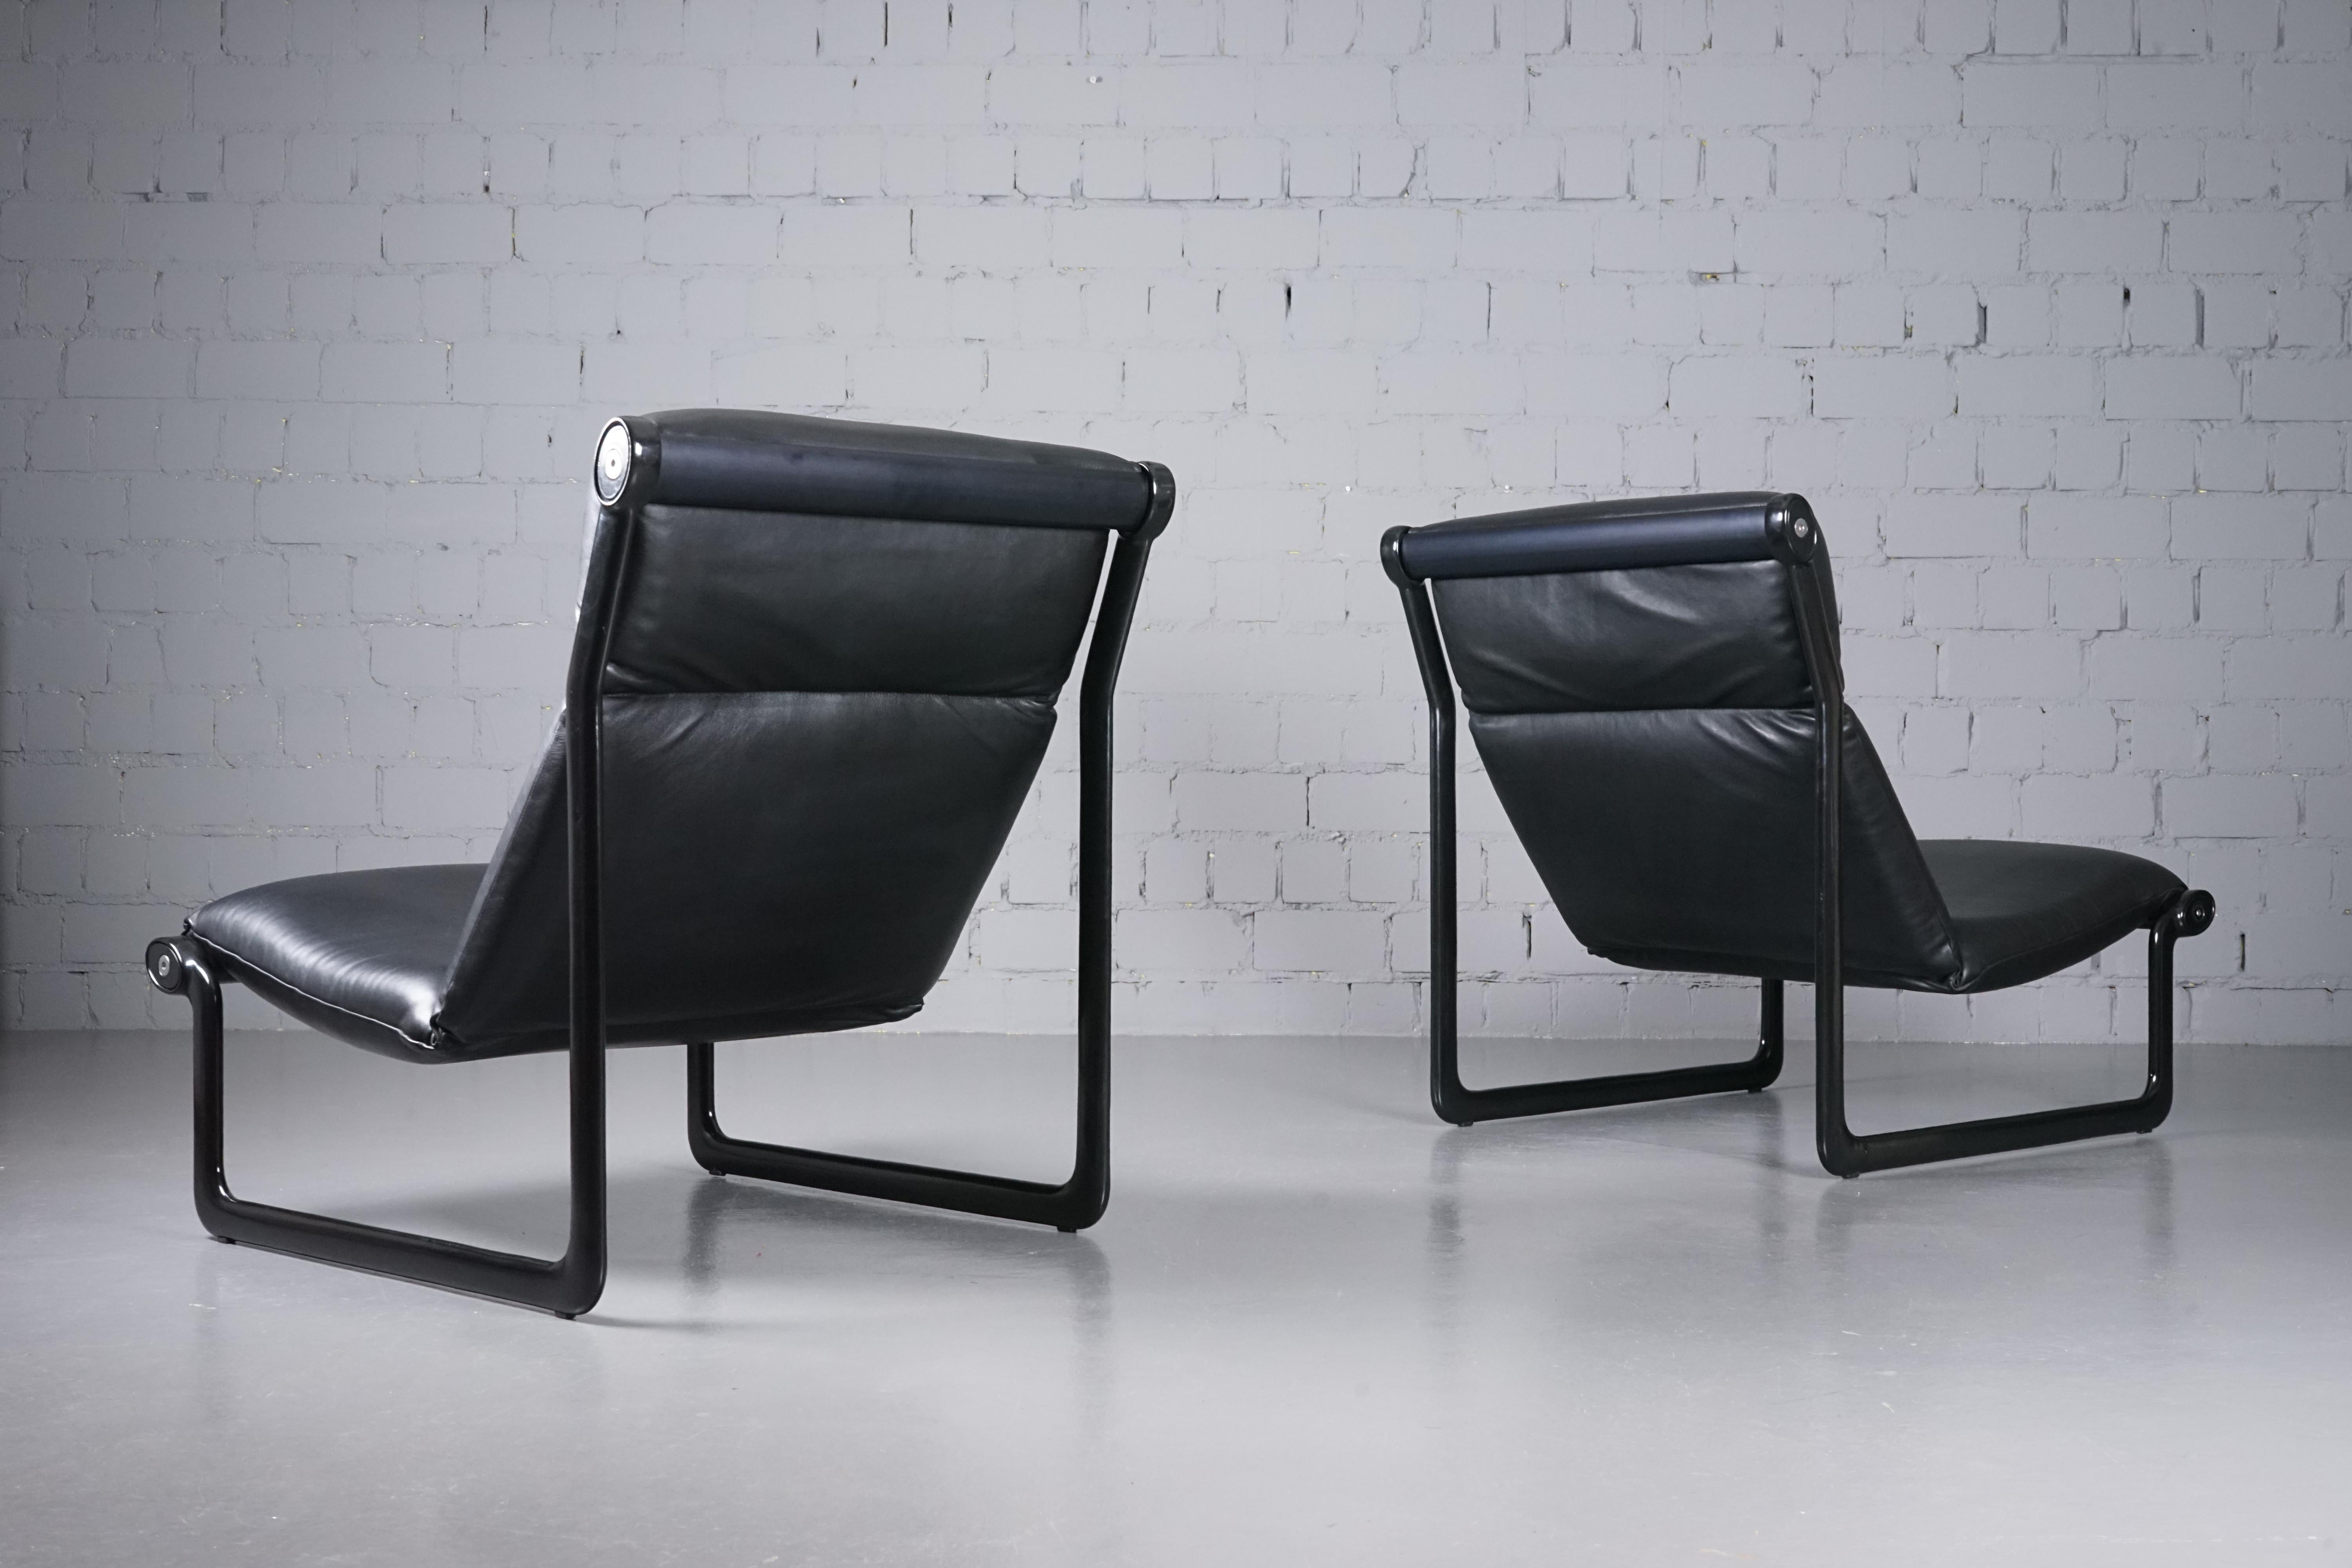 Aluminum Arm Chair Modell 2001 by Bruce Hannah & Andrew I. Morrison for Knoll Set of 2 For Sale